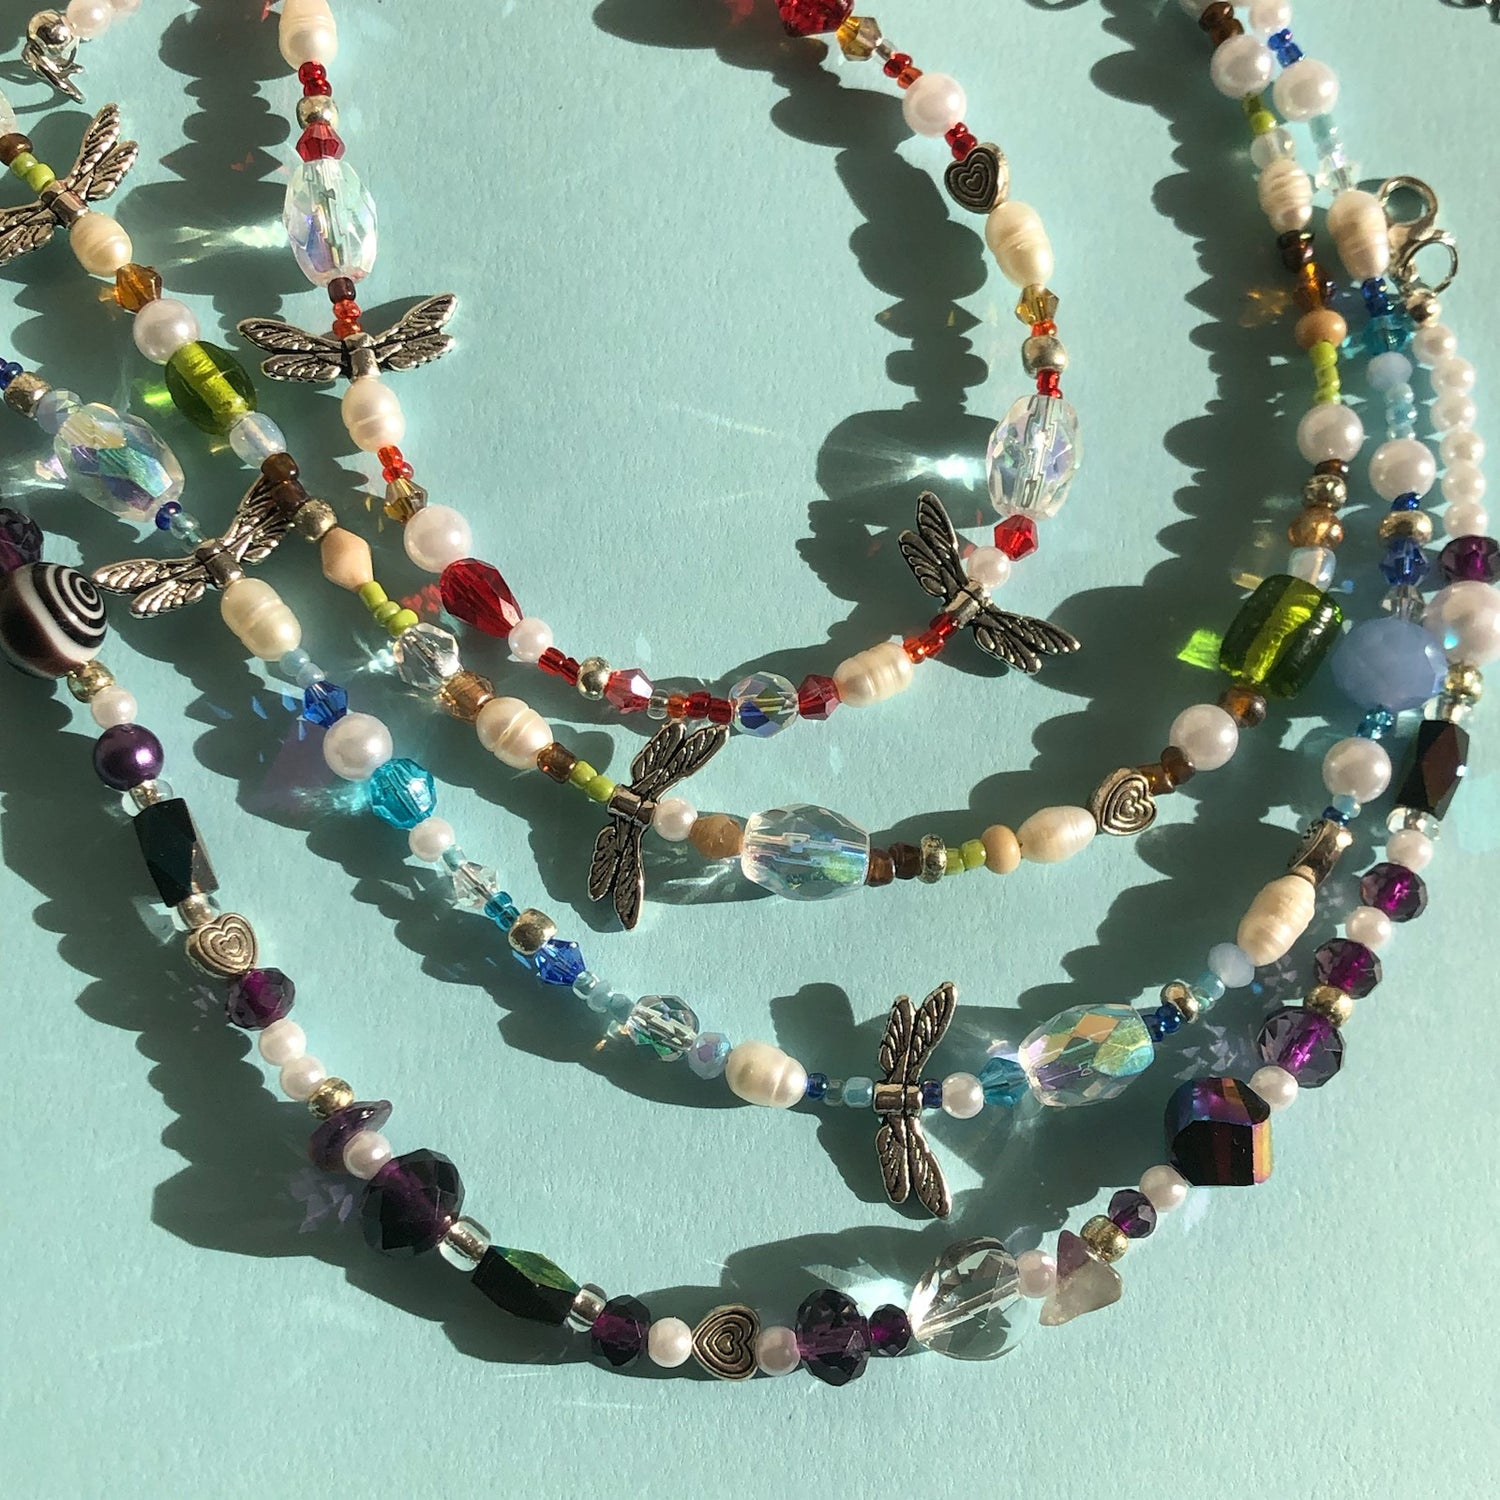 Glass bead necklaces